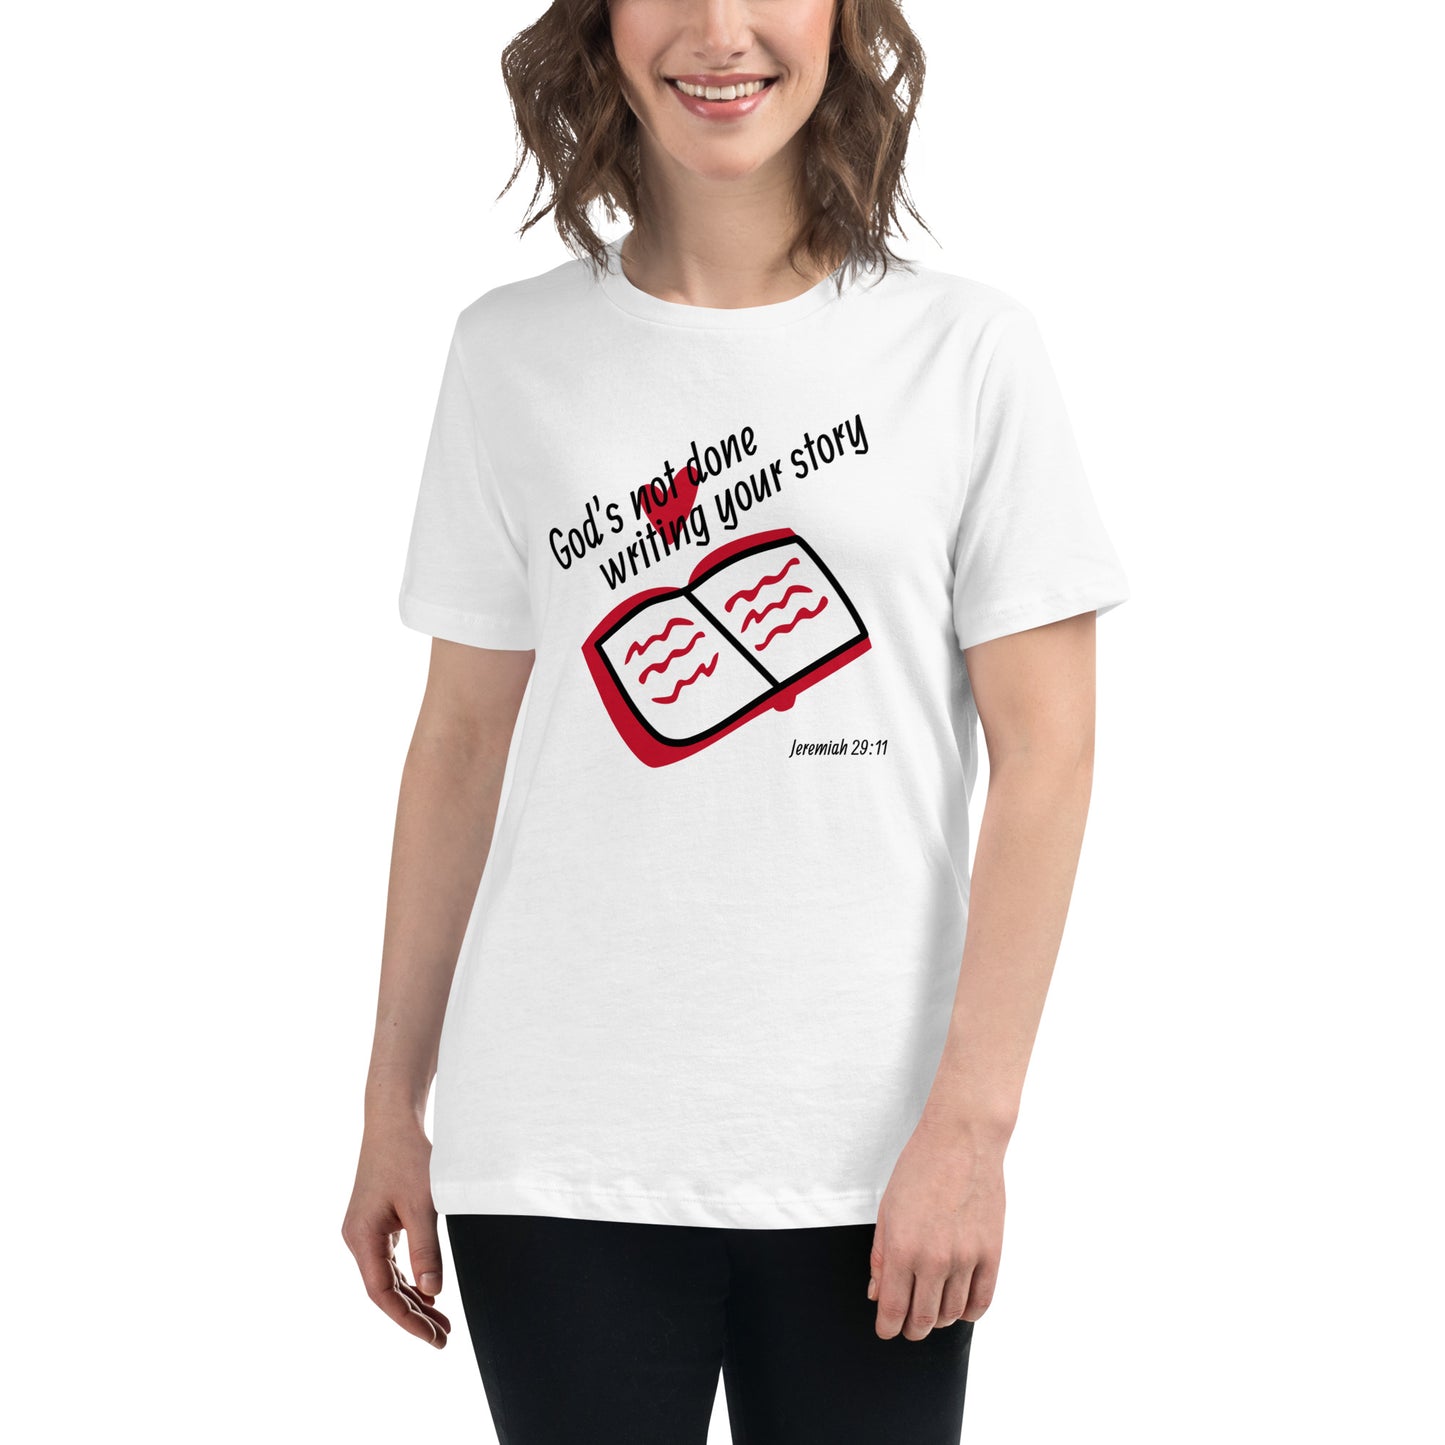 God's not done women's relaxed t-shirt | Christian t shirts